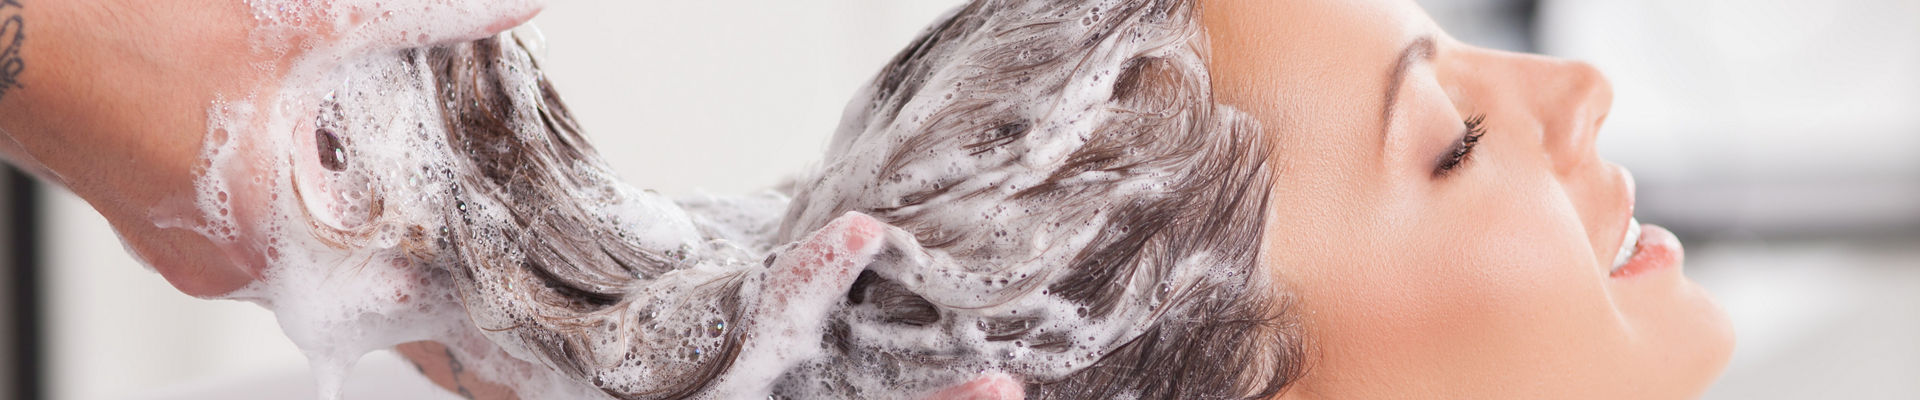 Close up of woman getting hair shampooed